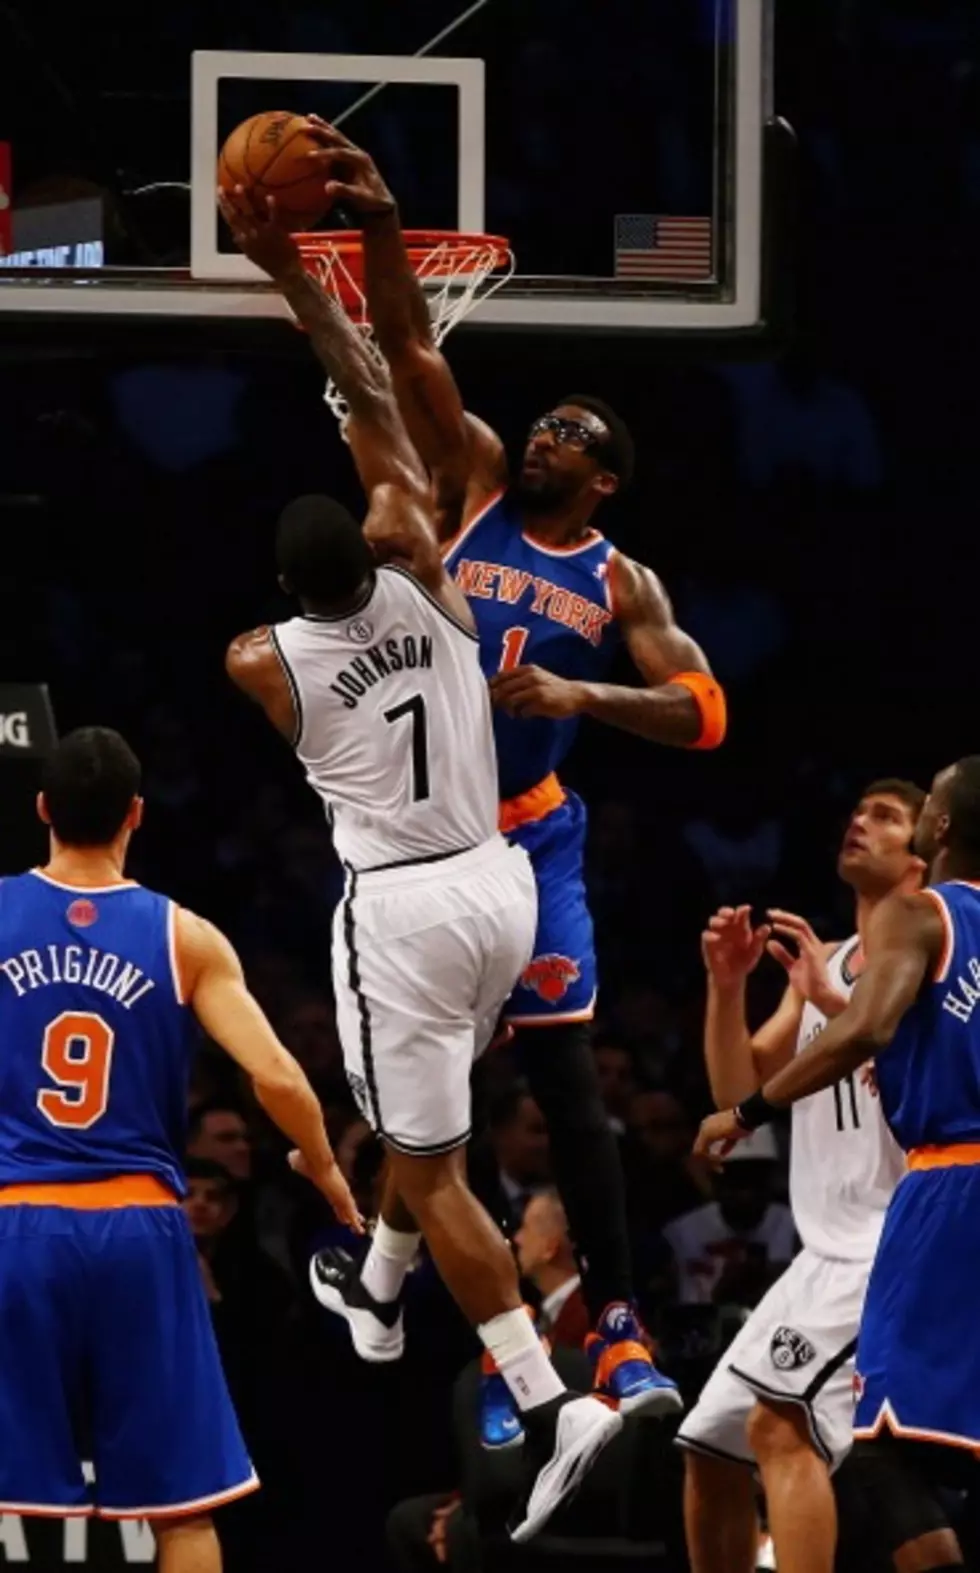 Amar'e Stoudemire 2013 Highlights (Video)